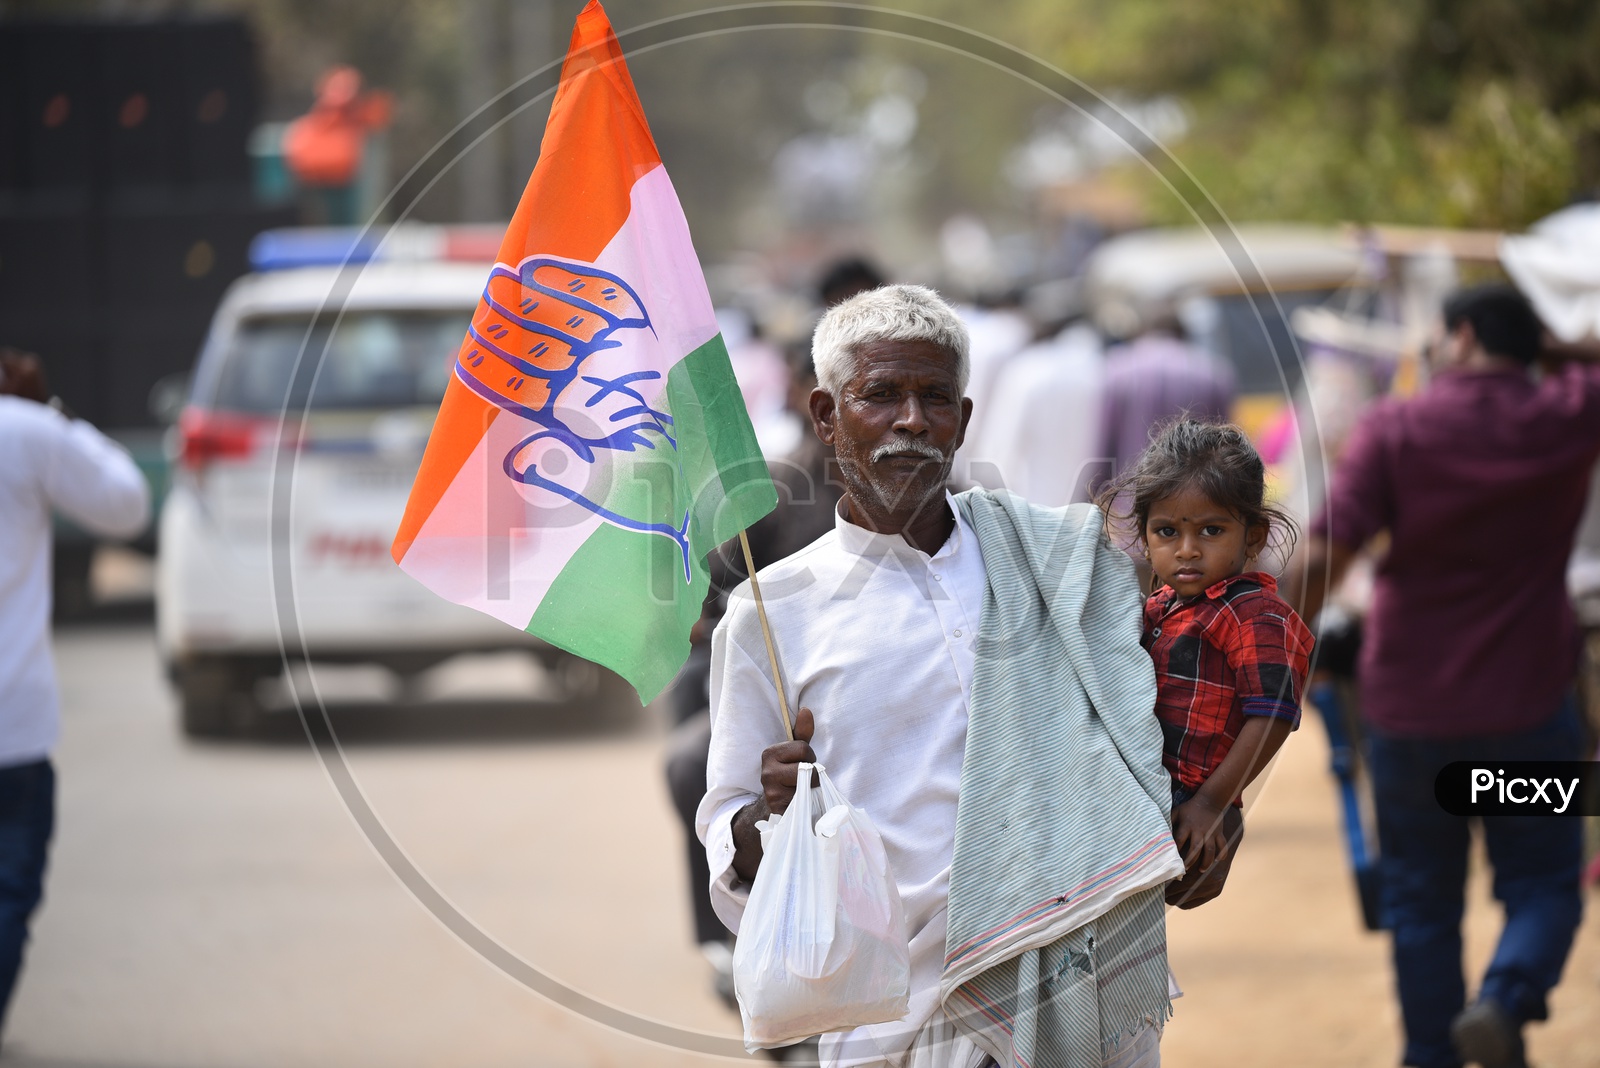 An Old Man Carrying His Grand Child Spotted in Election Rally With a Congress Flag in His Hand  in Tandur